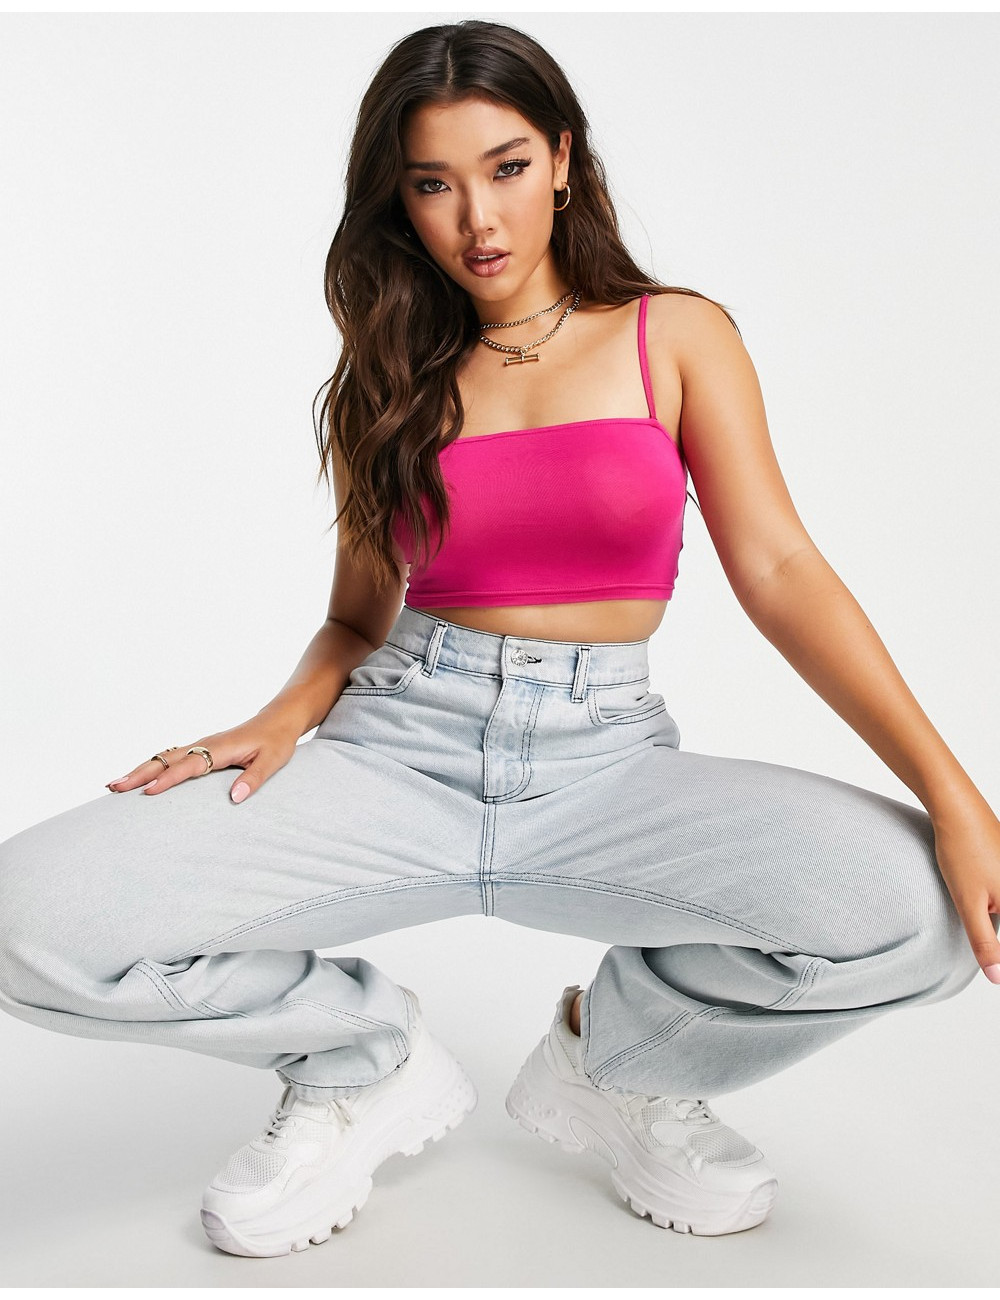 ASYOU crop top in bright pink